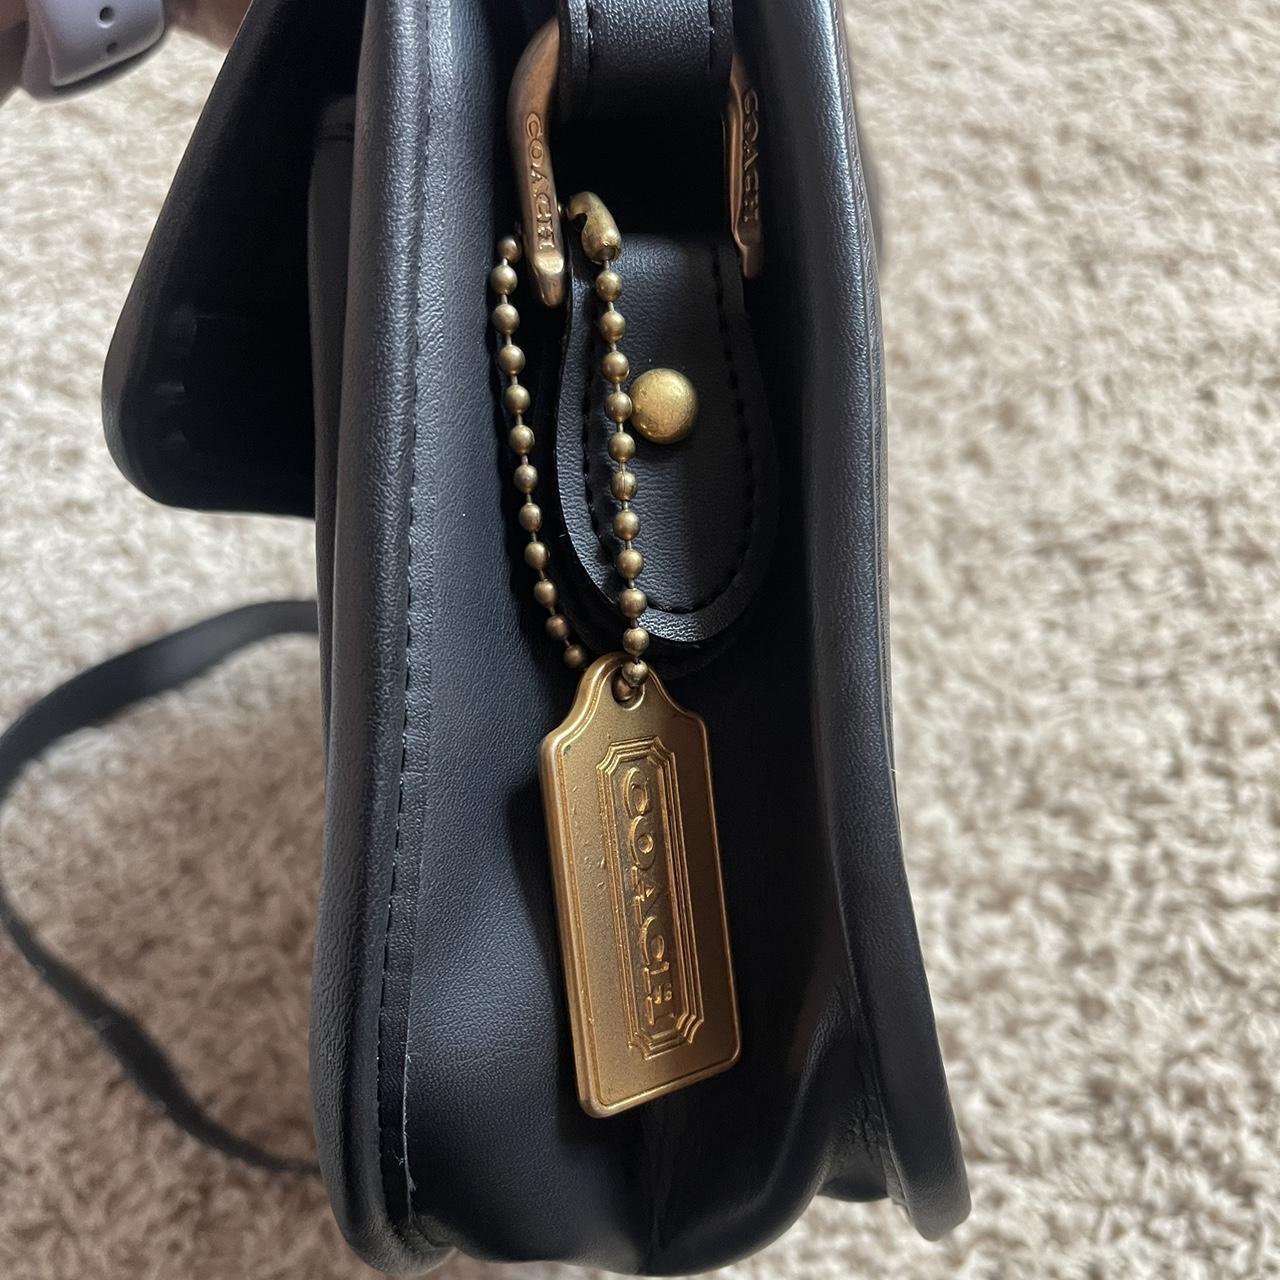 Coach Jes crossbody Used bag in great condition - Depop